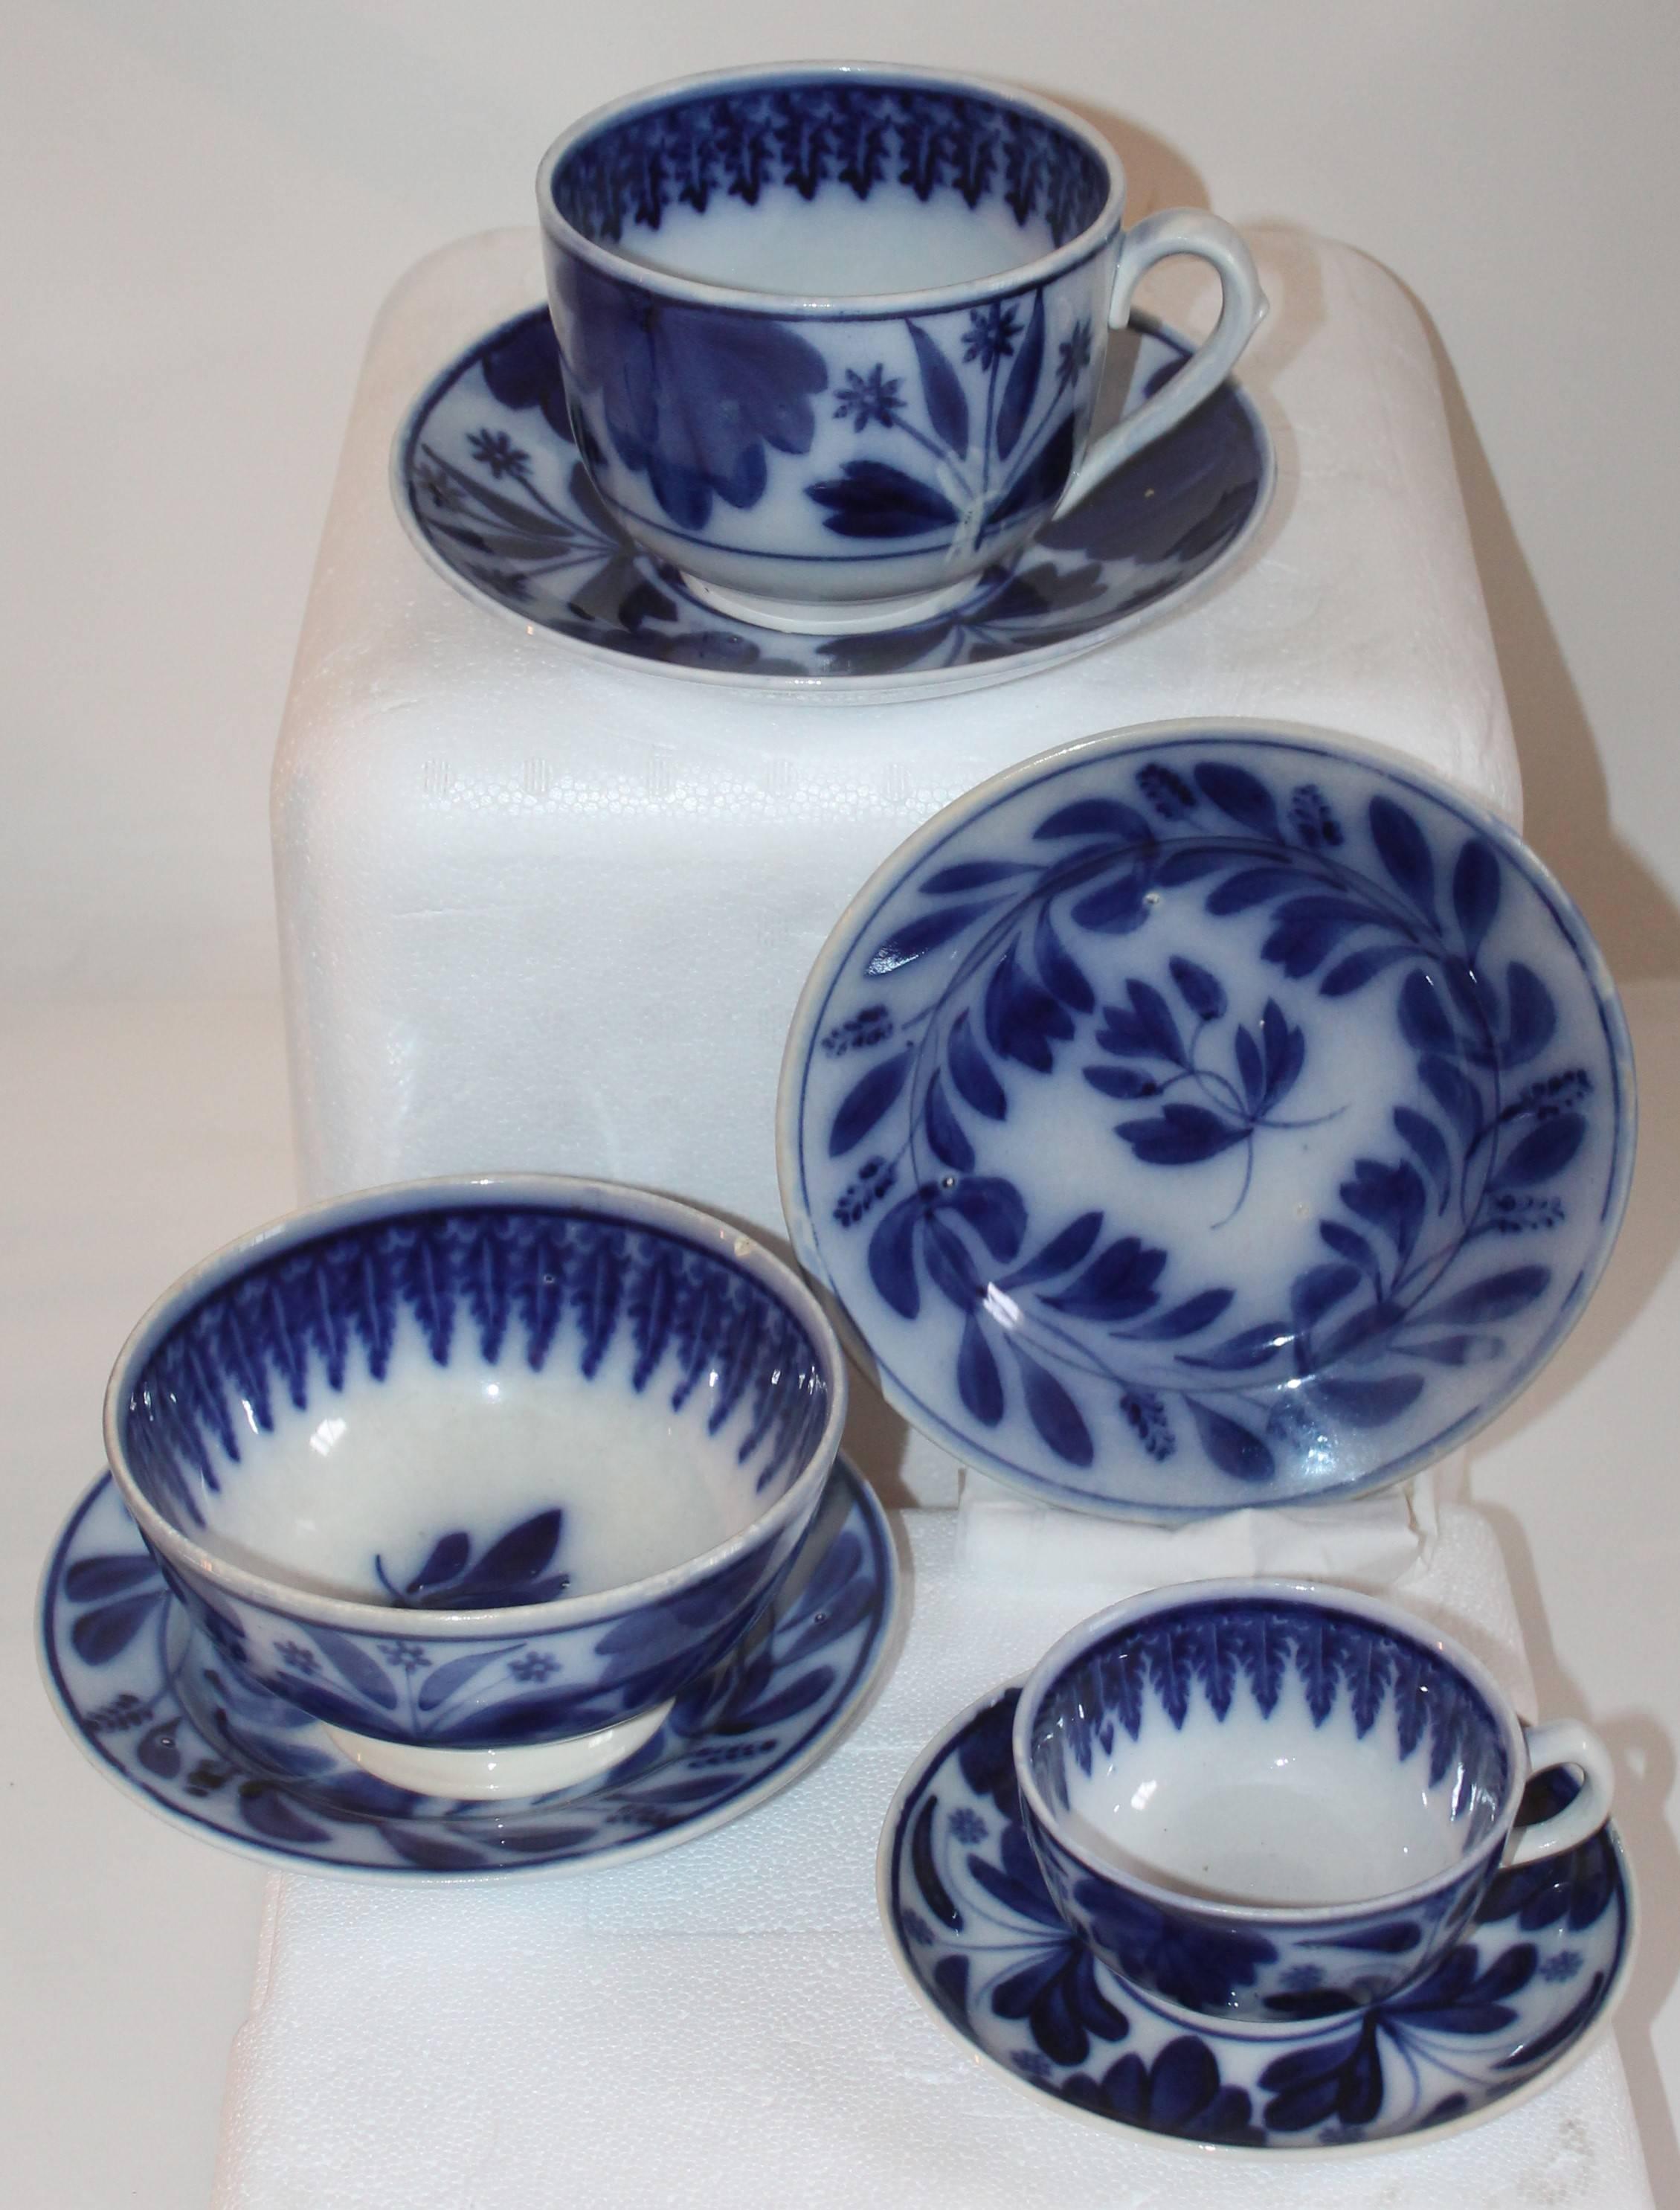 Set of seven flow blue collection in mint condition and hand-painted. This is a real find and great colors.

Mush cup and saucer measure - 
Mush cup - 6 inches x 5 inches x 3.5 inches
Plate - 8 inches x 1 inch.

Soup bowl and saucer-
bowl - 6